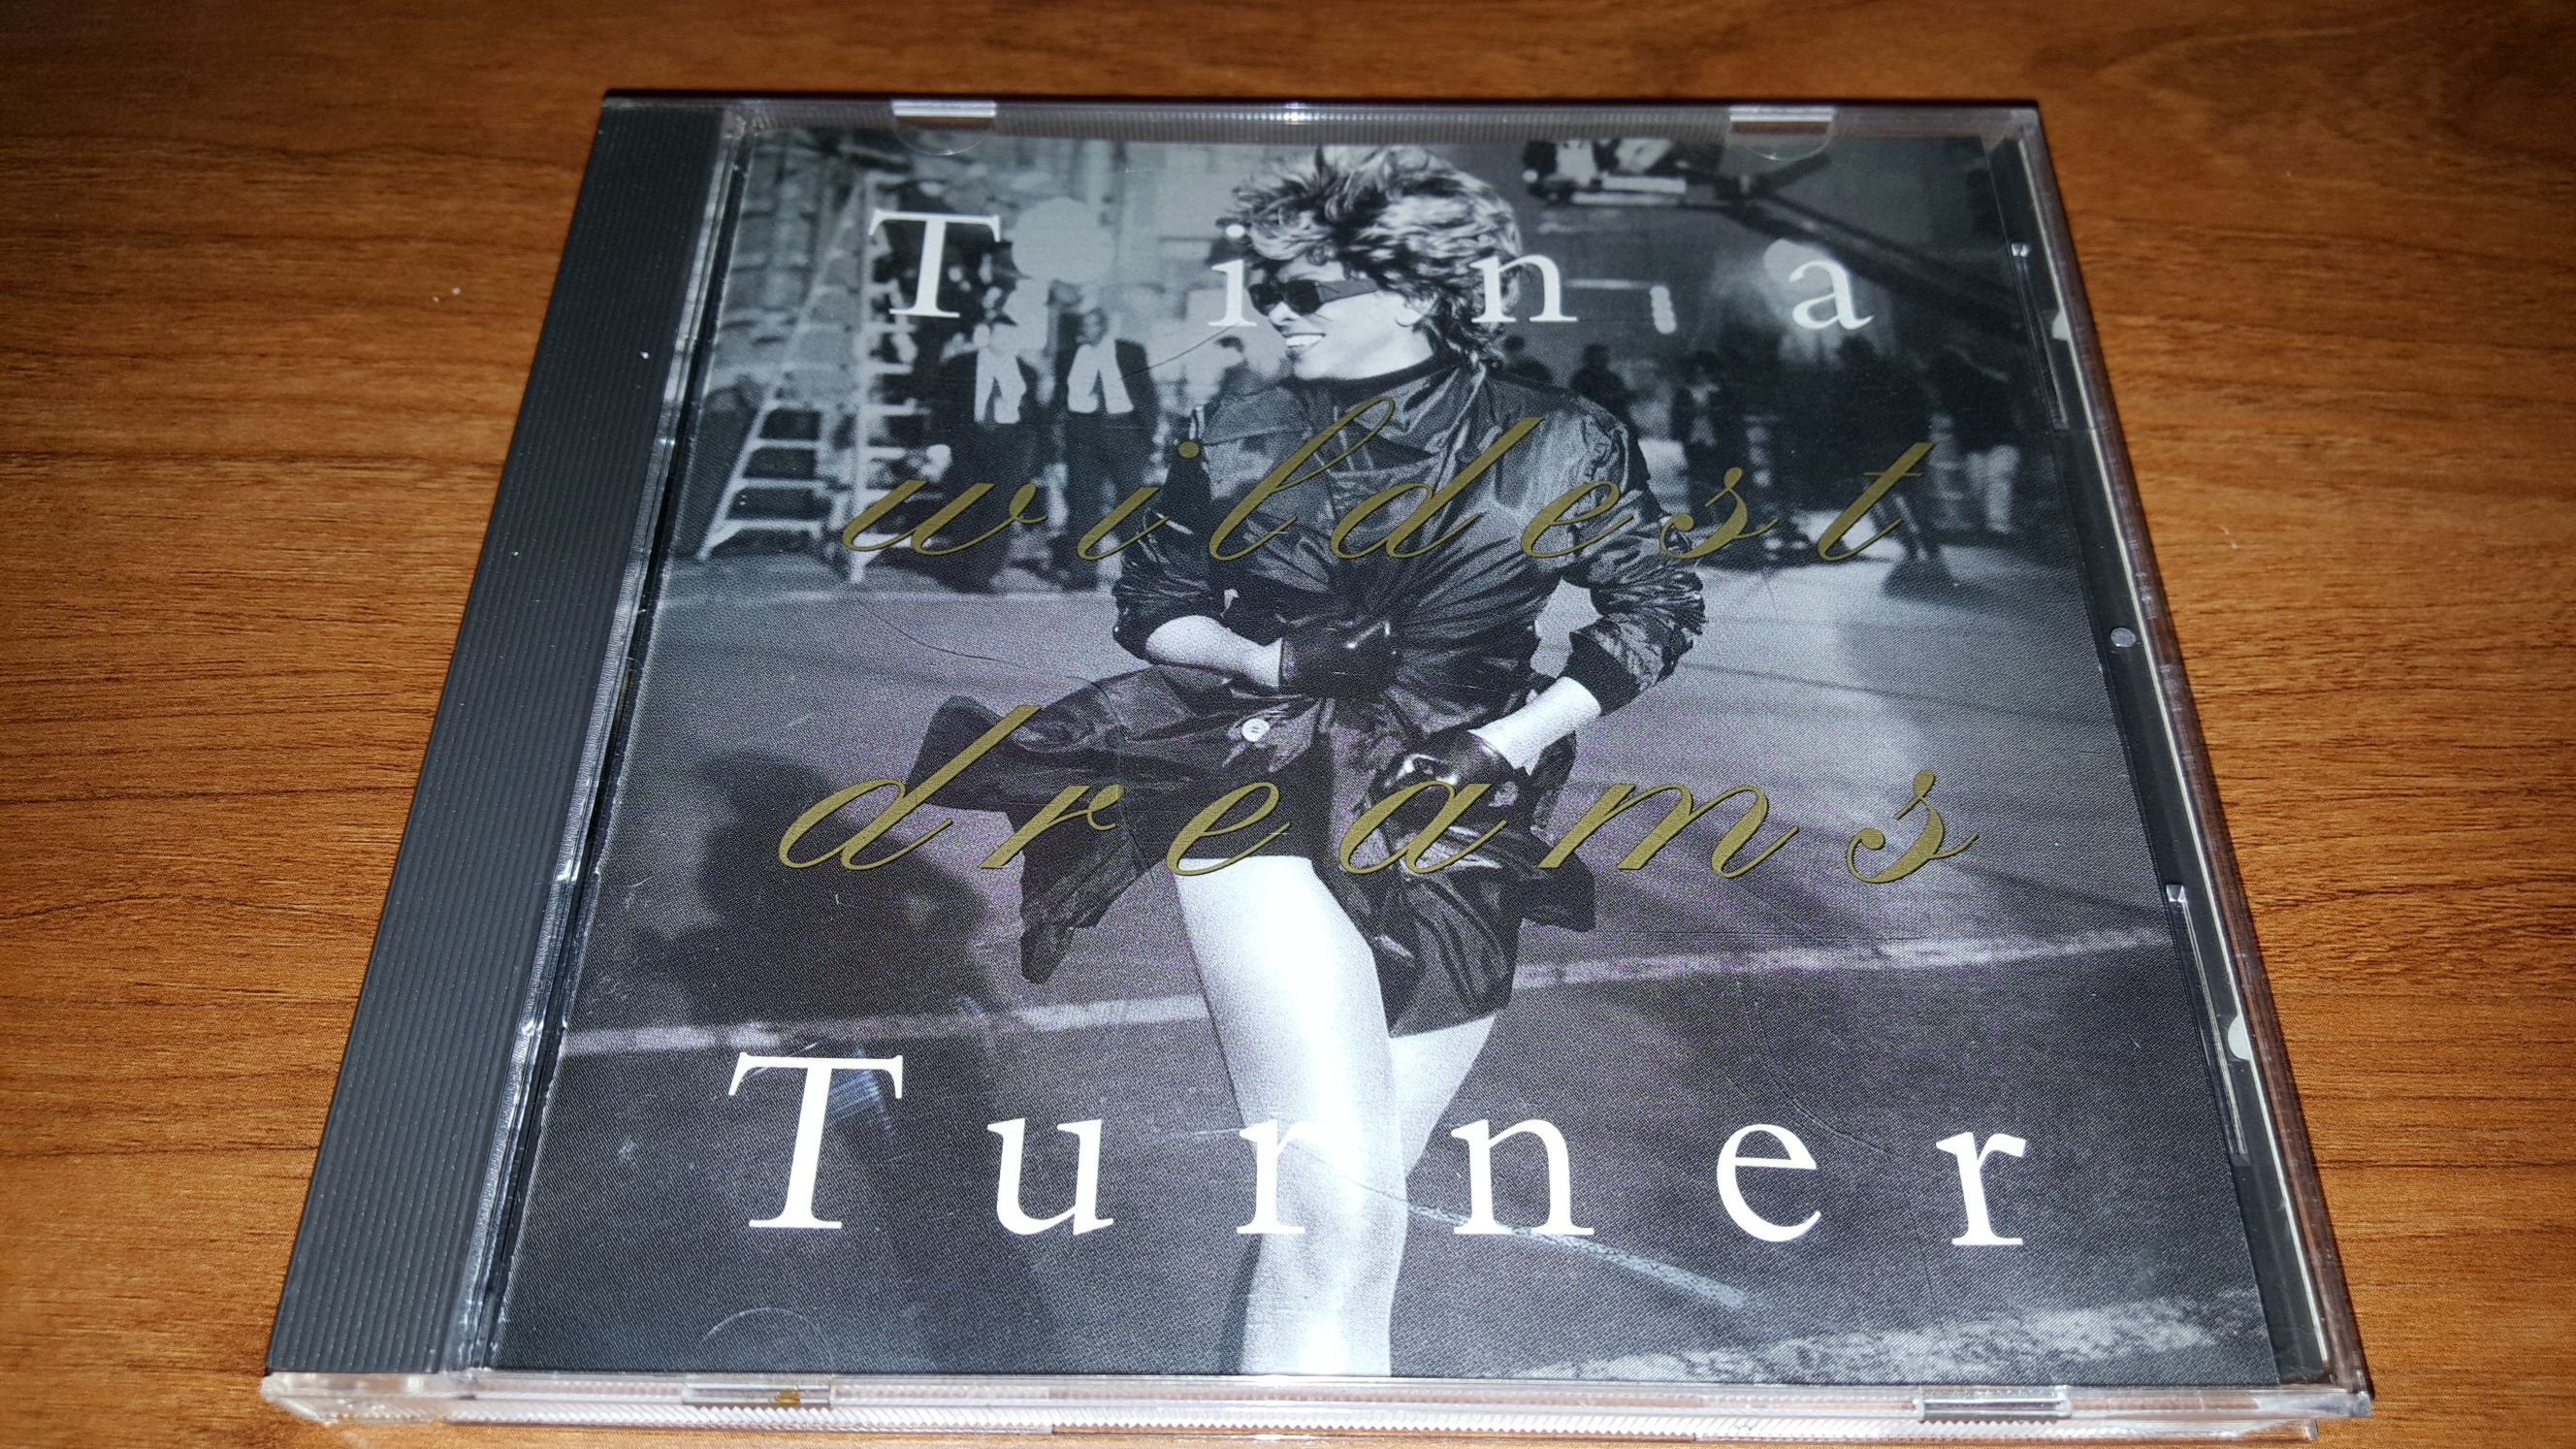 Wildest Dreams - Tina Turner (CD) music collectible - Main Image 1